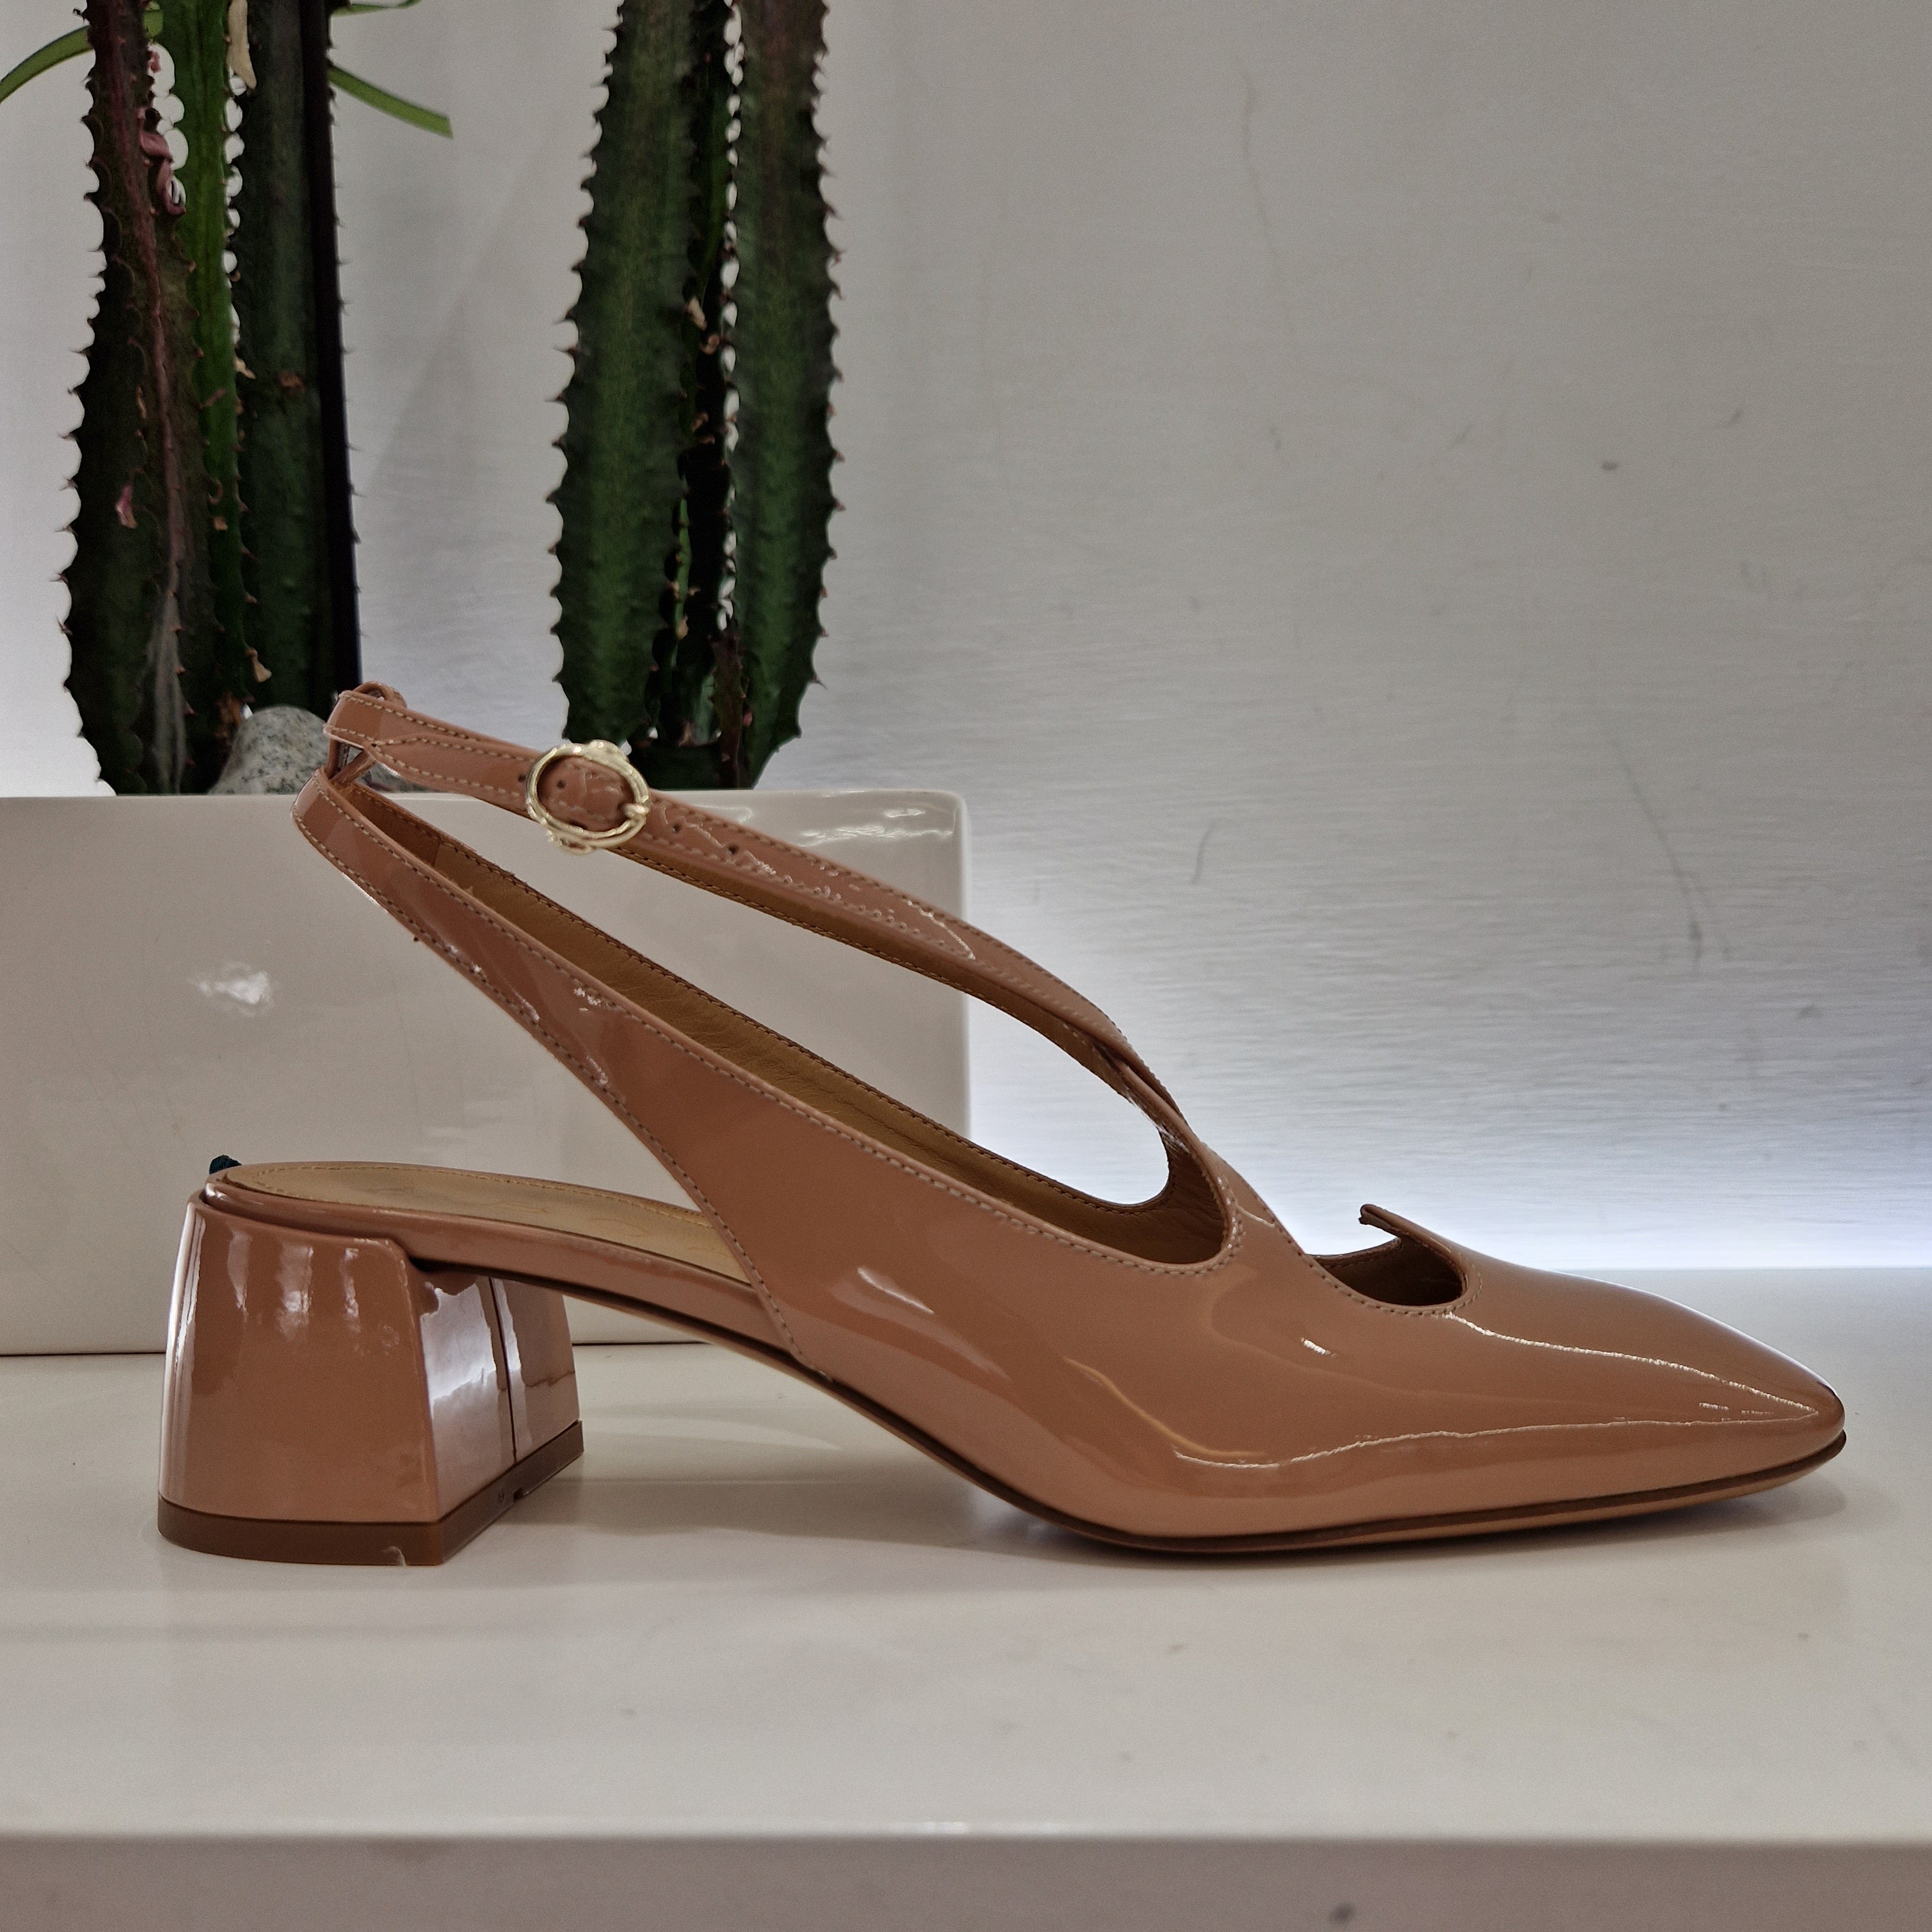 A.Bocca sling back nude